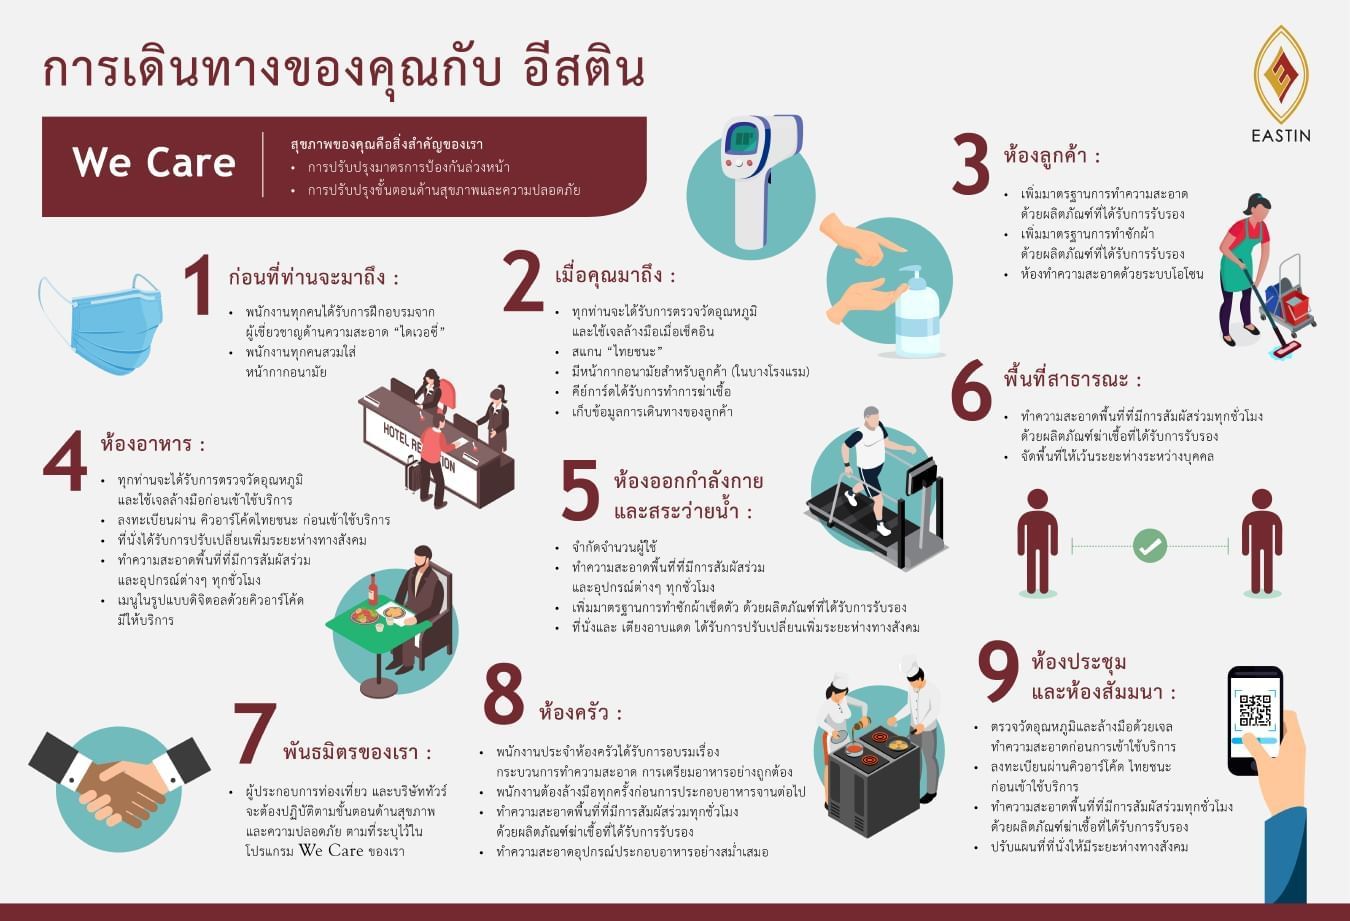 Poster in Thai with health priorities and rules at Eastin hotel